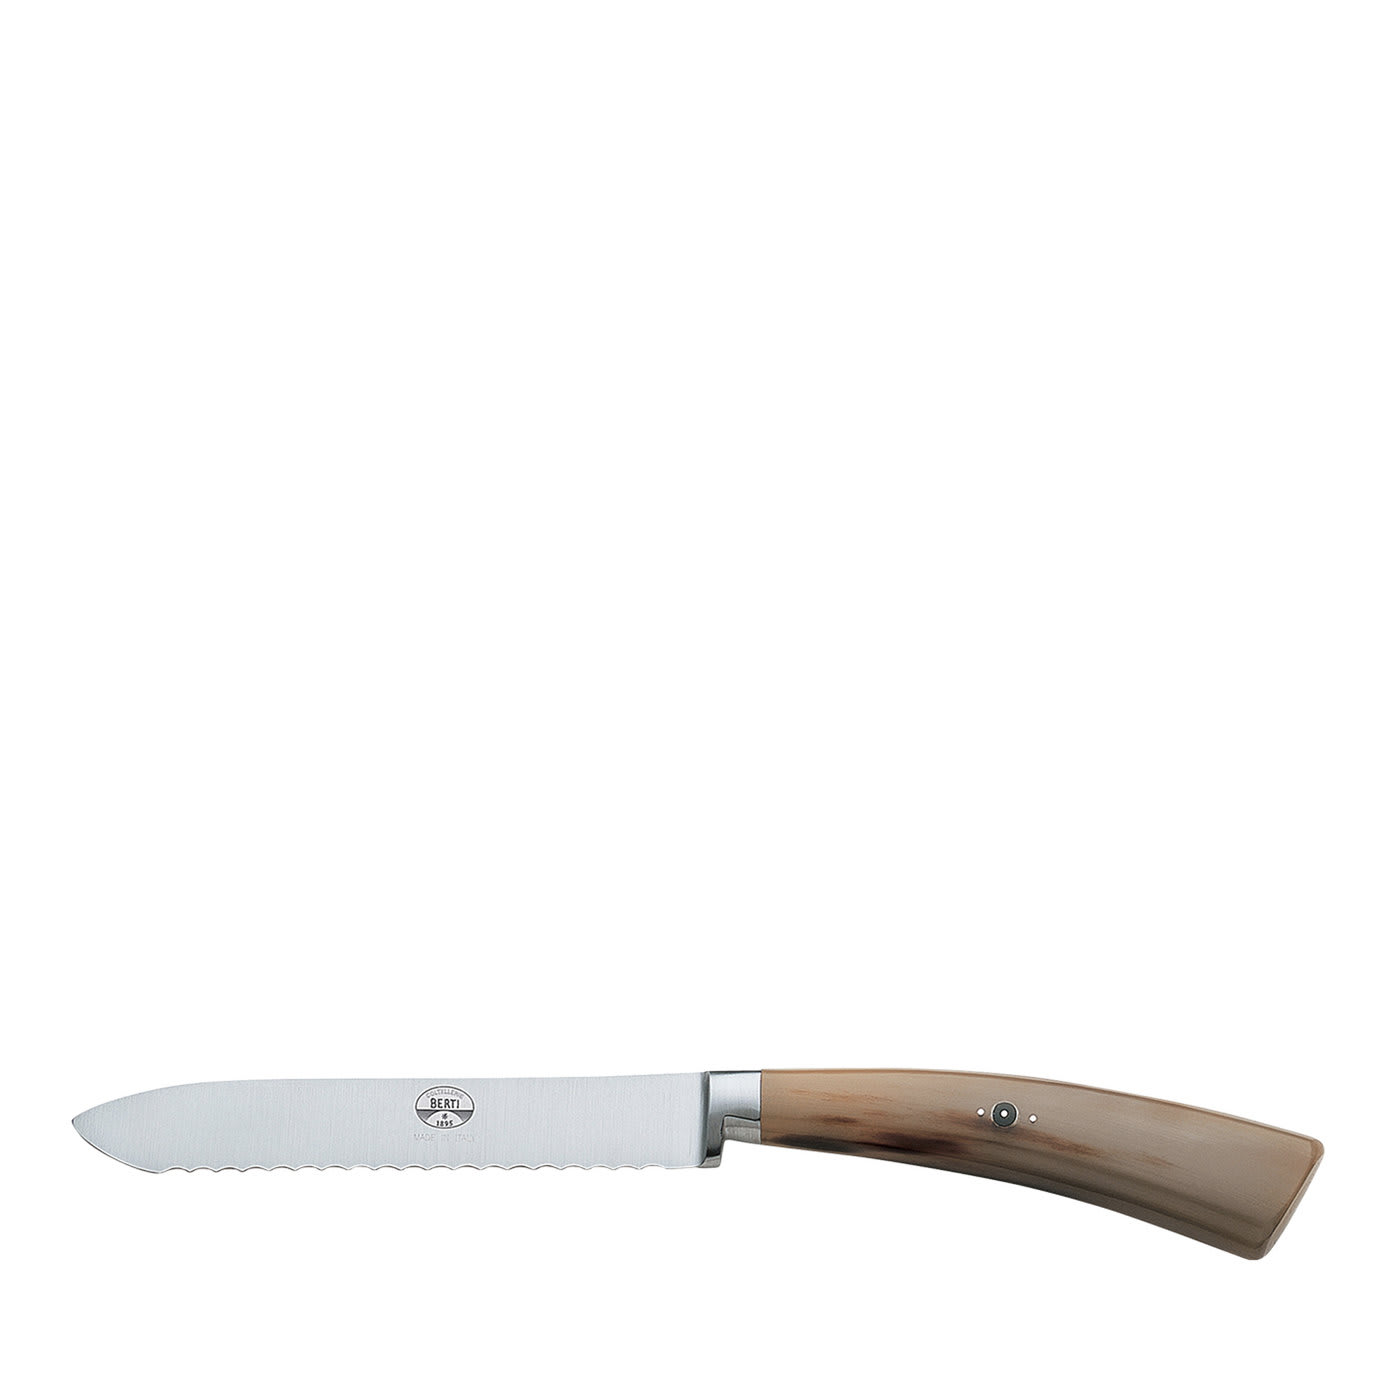 Tomato Knife with Oxhorn Handle - Coltellerie Berti